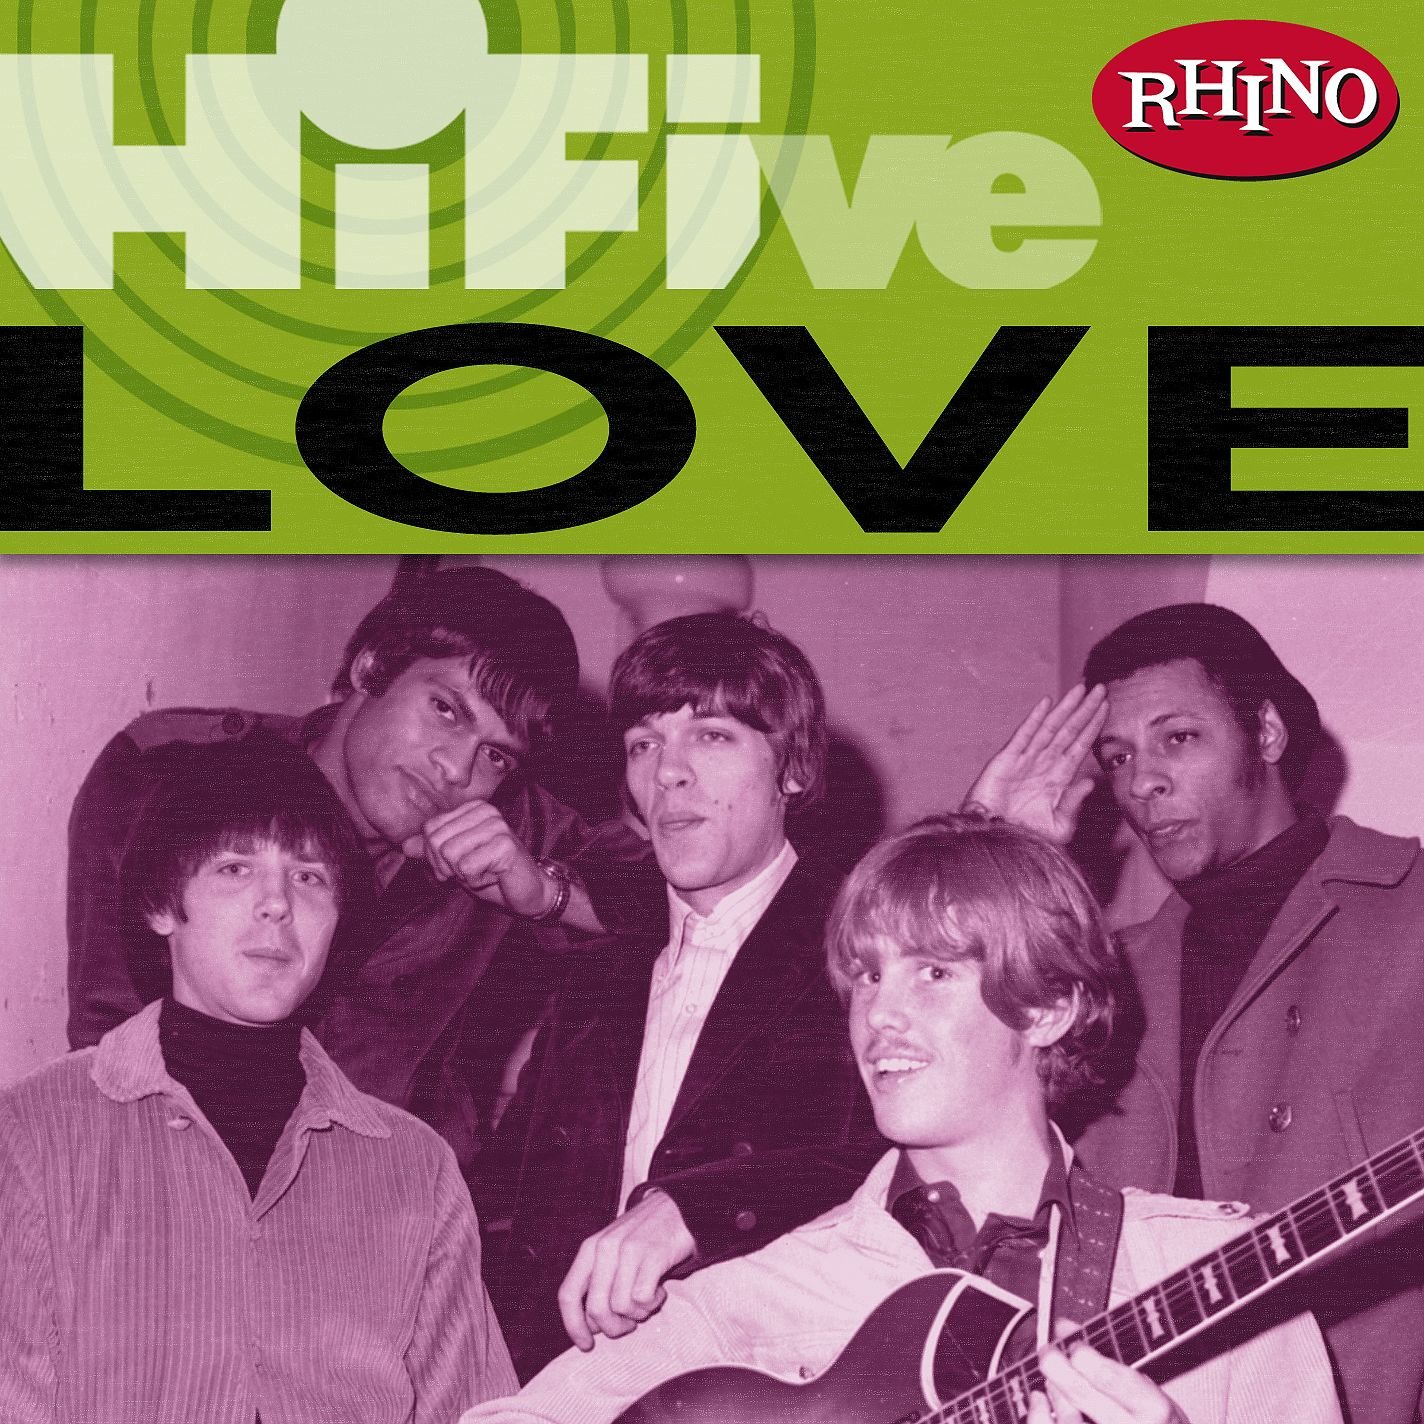 Music 5 love. Love Forever changes обложка. Talking heads Greatest Hits. Фотография с альбома 5five love66. U.K. subs Band.